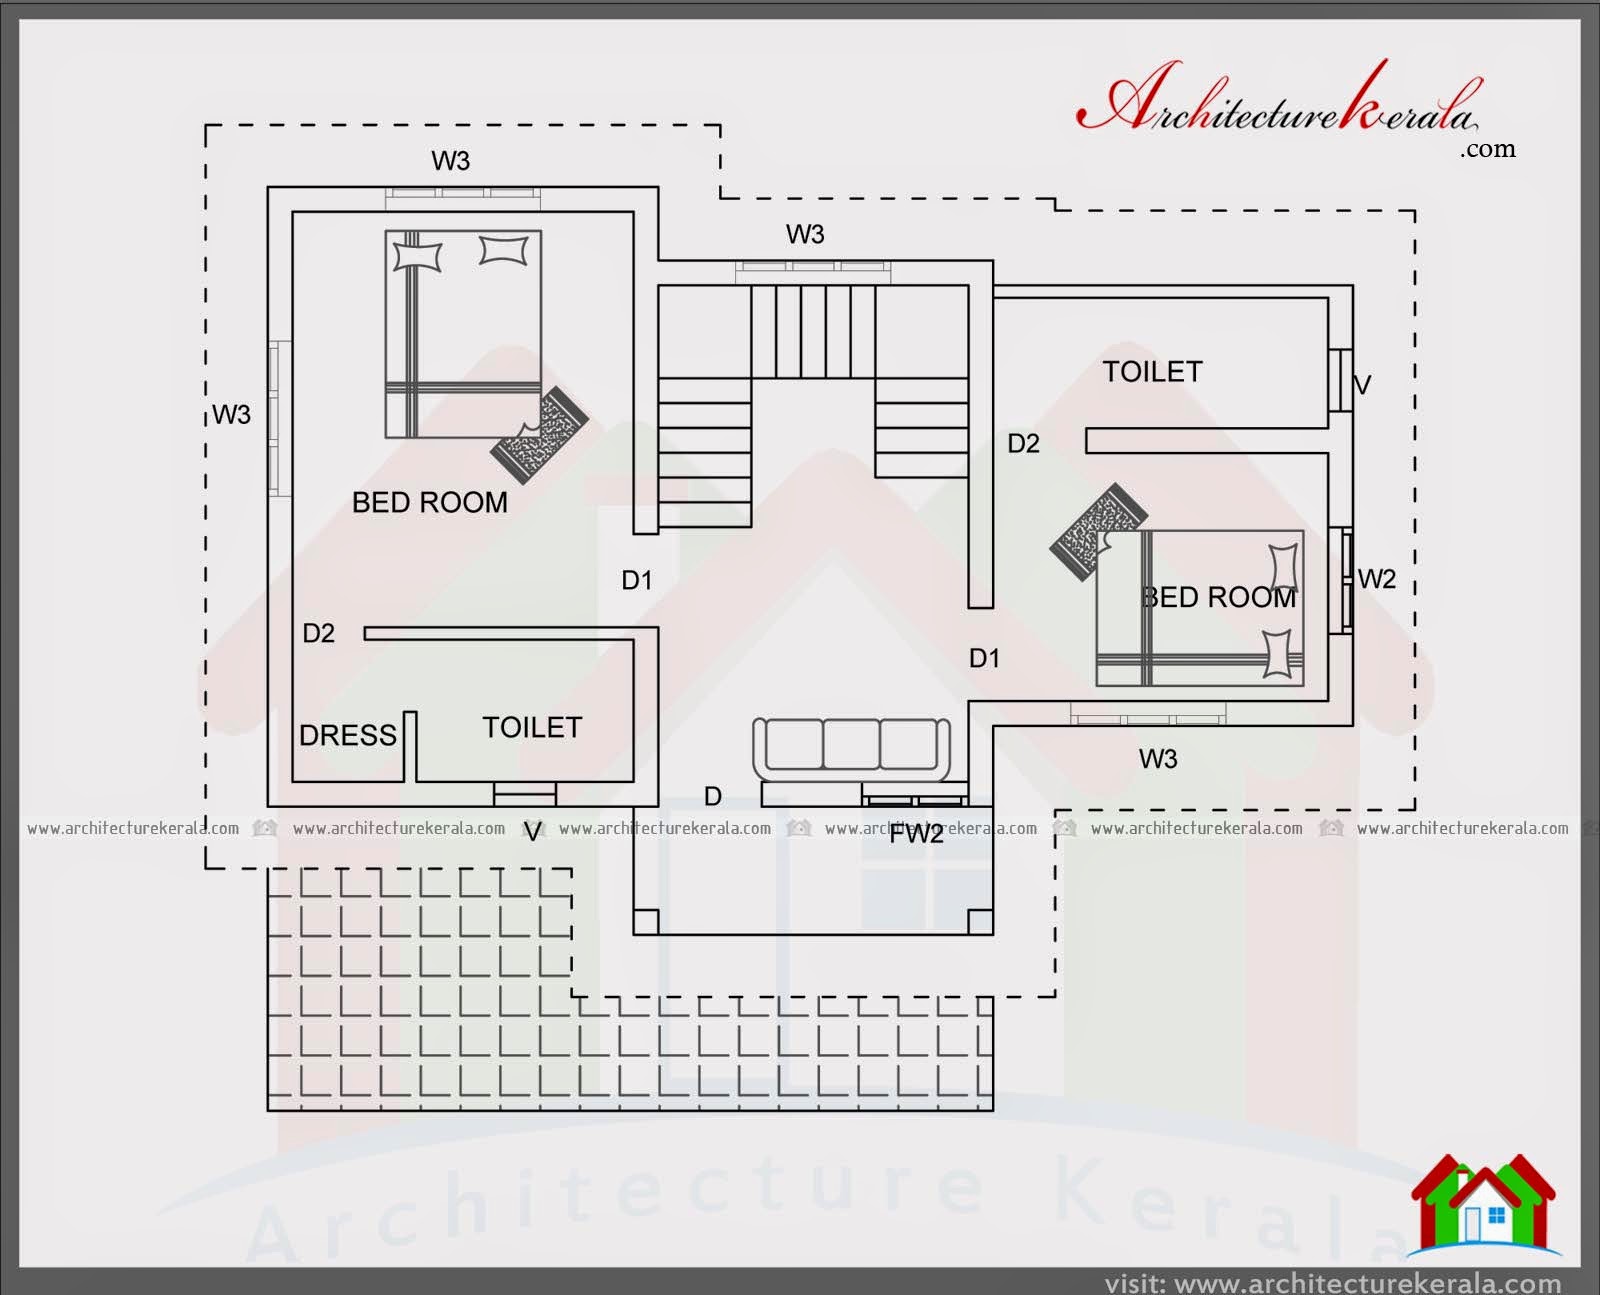 4 BEDROOM HOUSE  PLAN  IN 1400  SQUARE  FEET  ARCHITECTURE KERALA